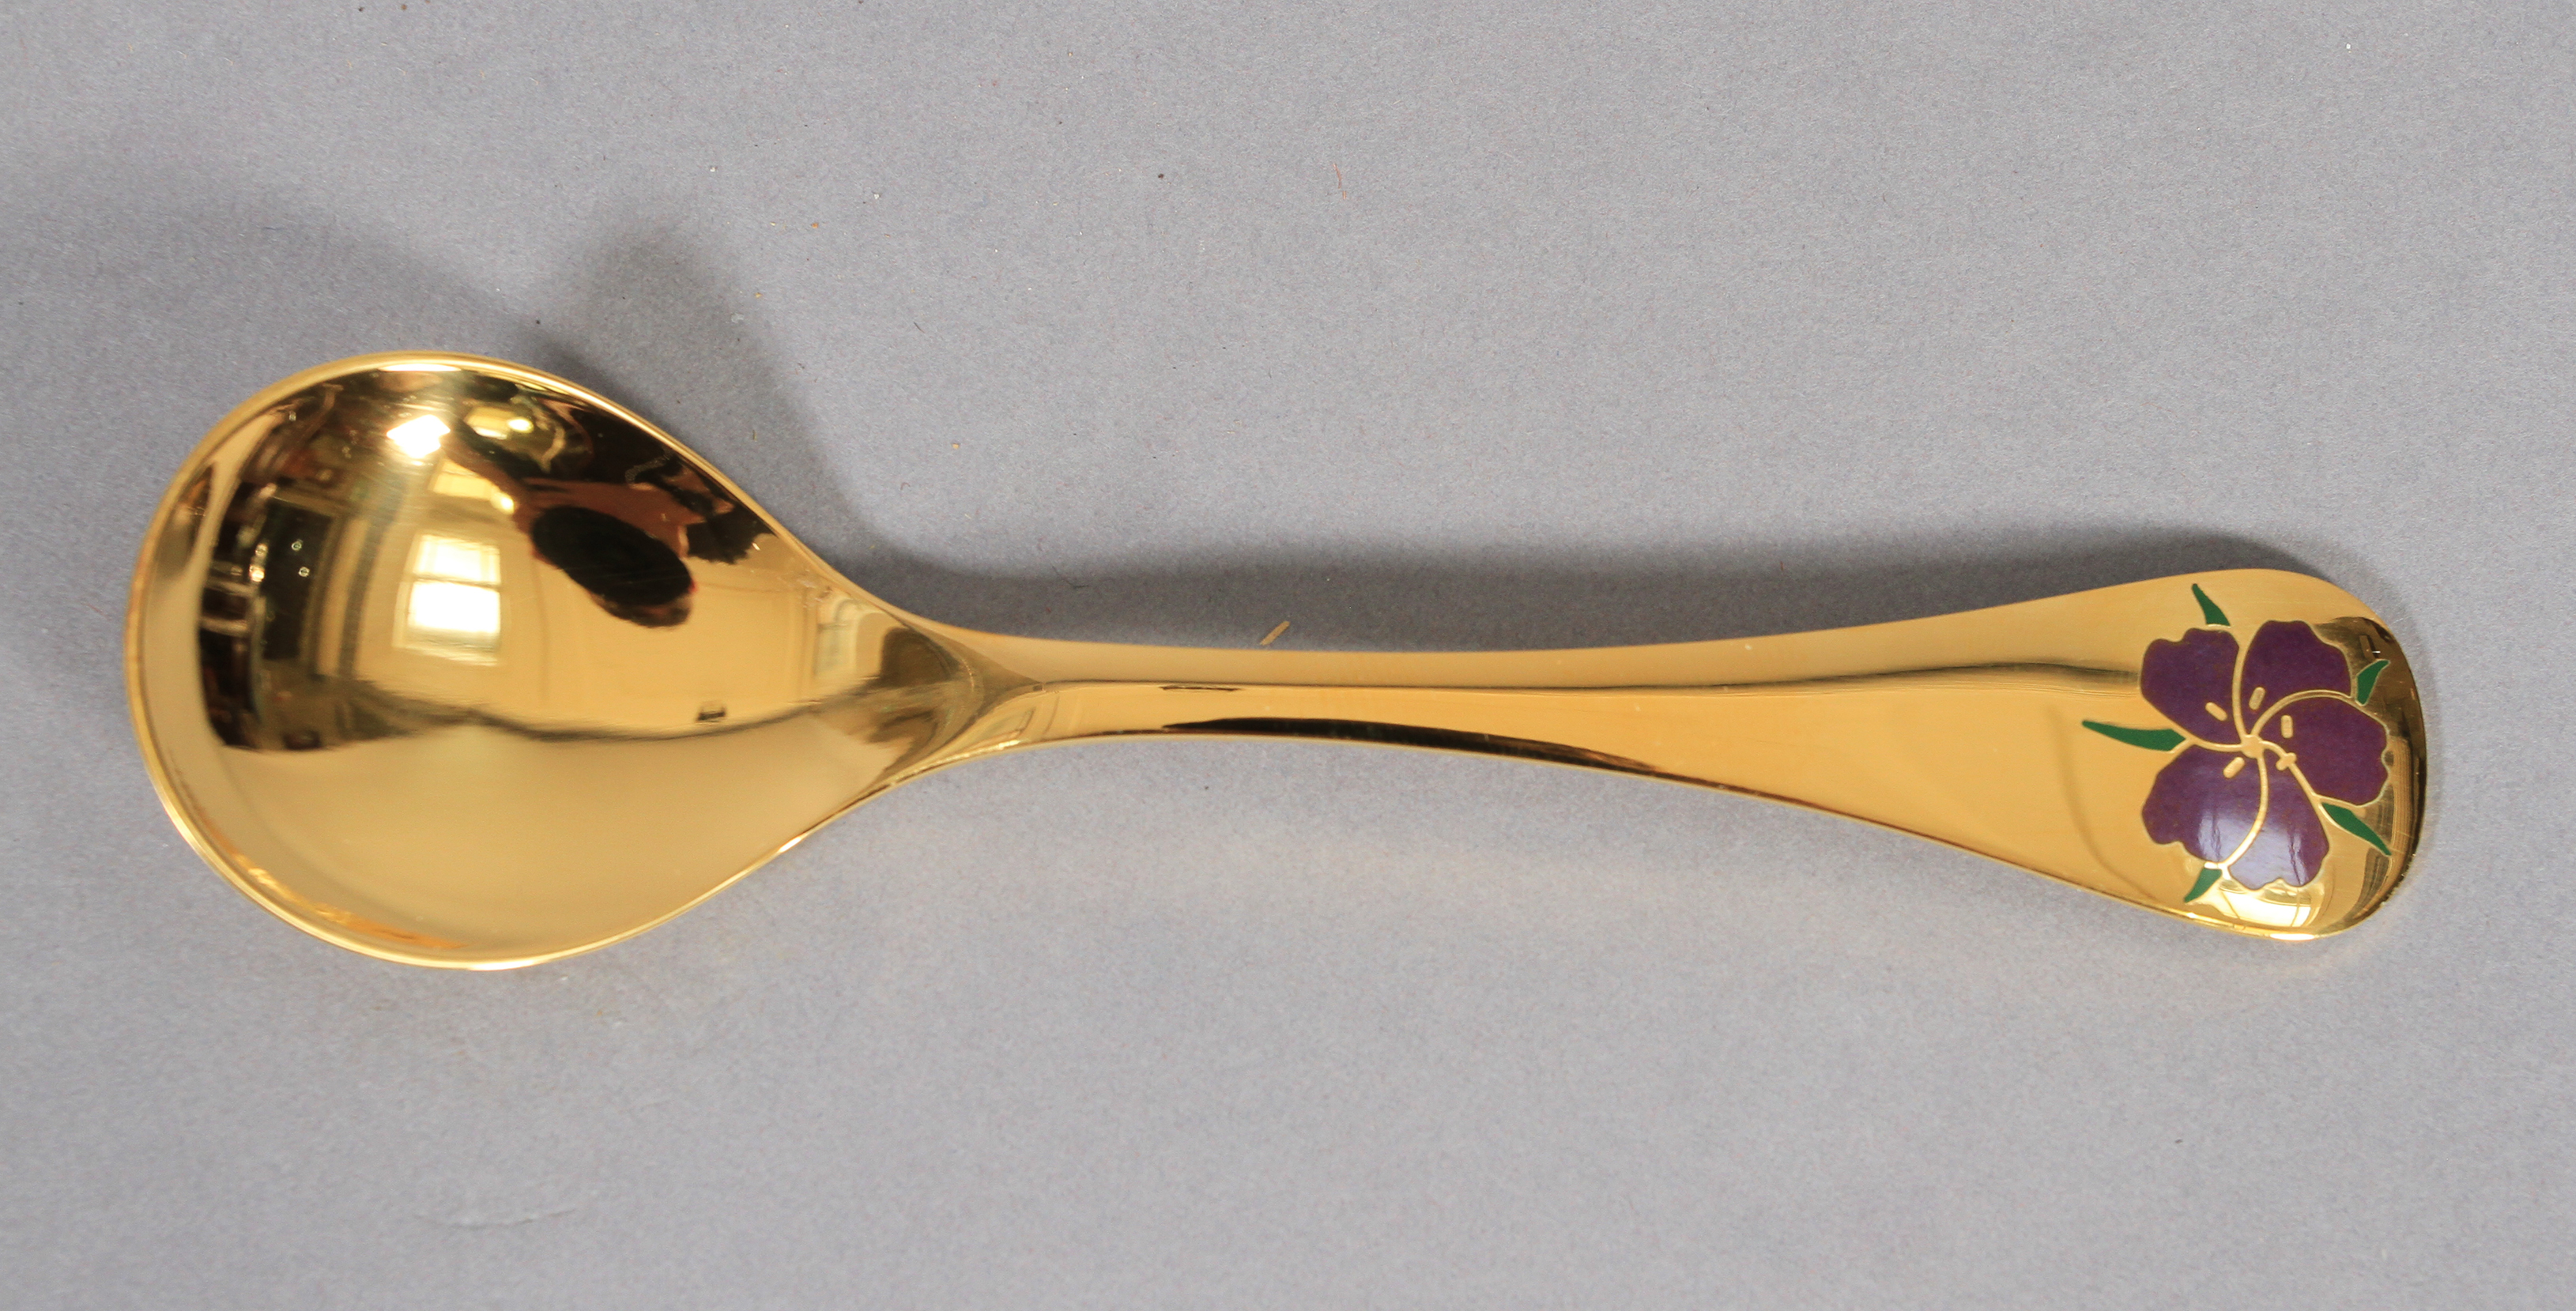 Georg Jensen, a .925 silver gilt year spoon for 1 974 with corn cockle motif in aubergine and - Image 2 of 2